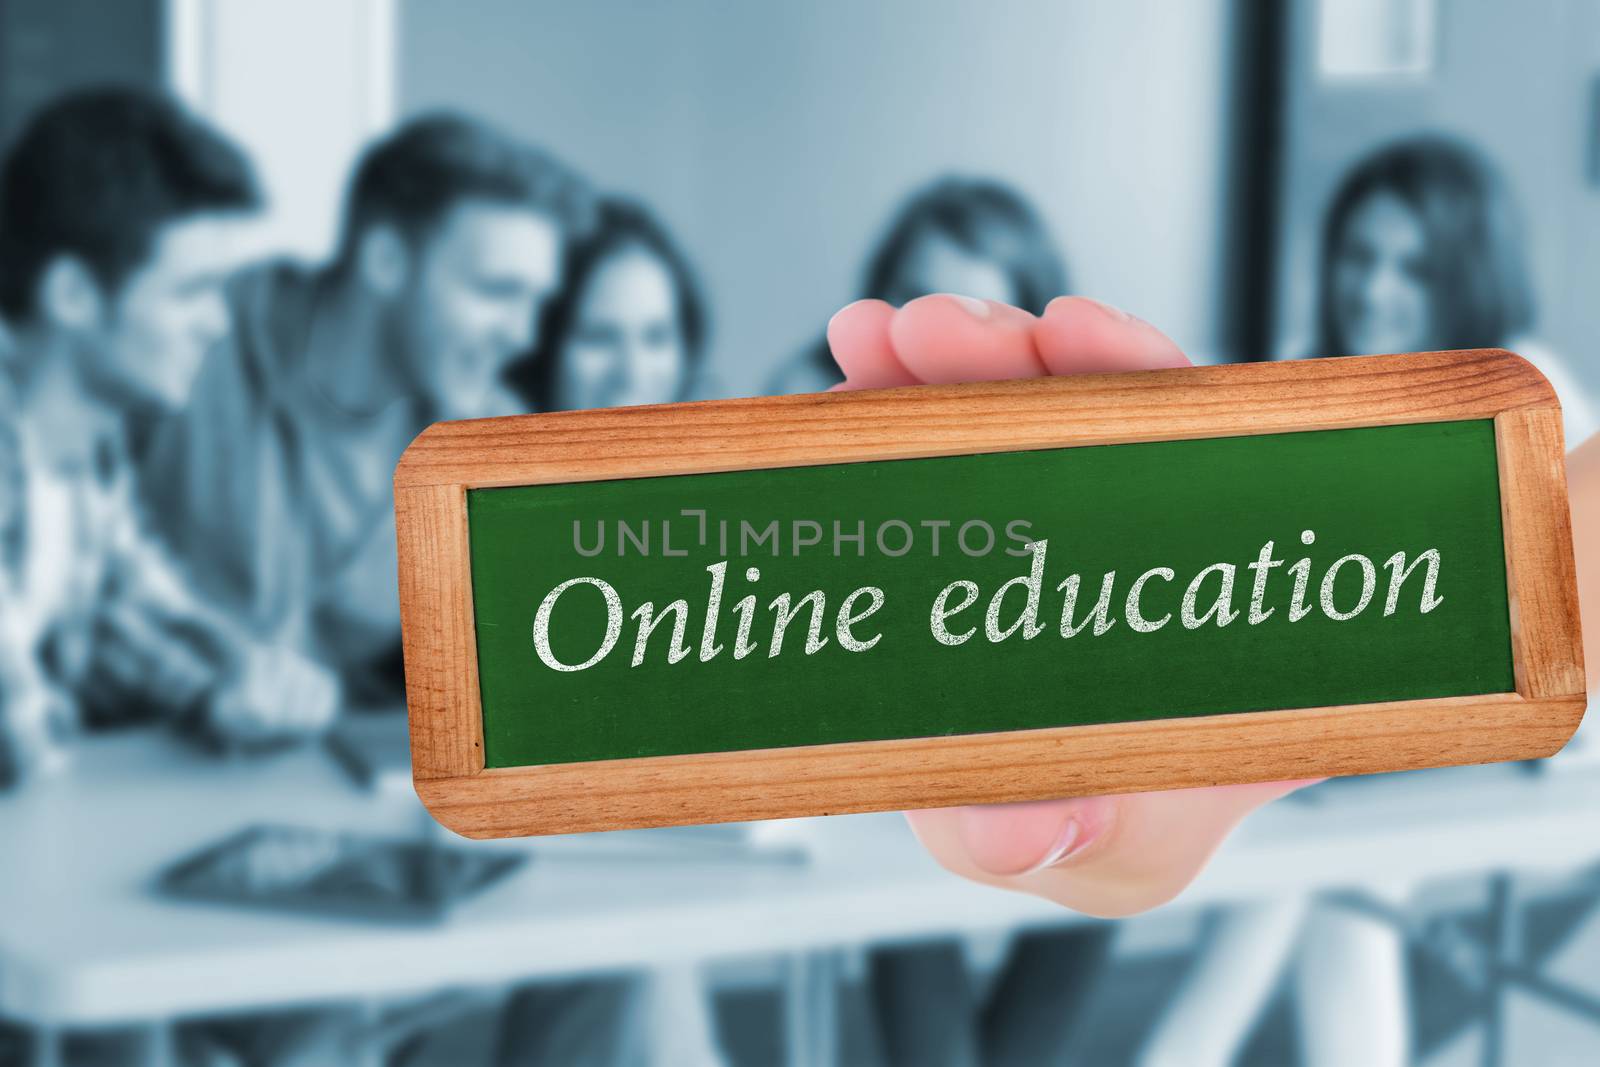 The word online education and hand showing chalkboard against smiling friends students using laptop